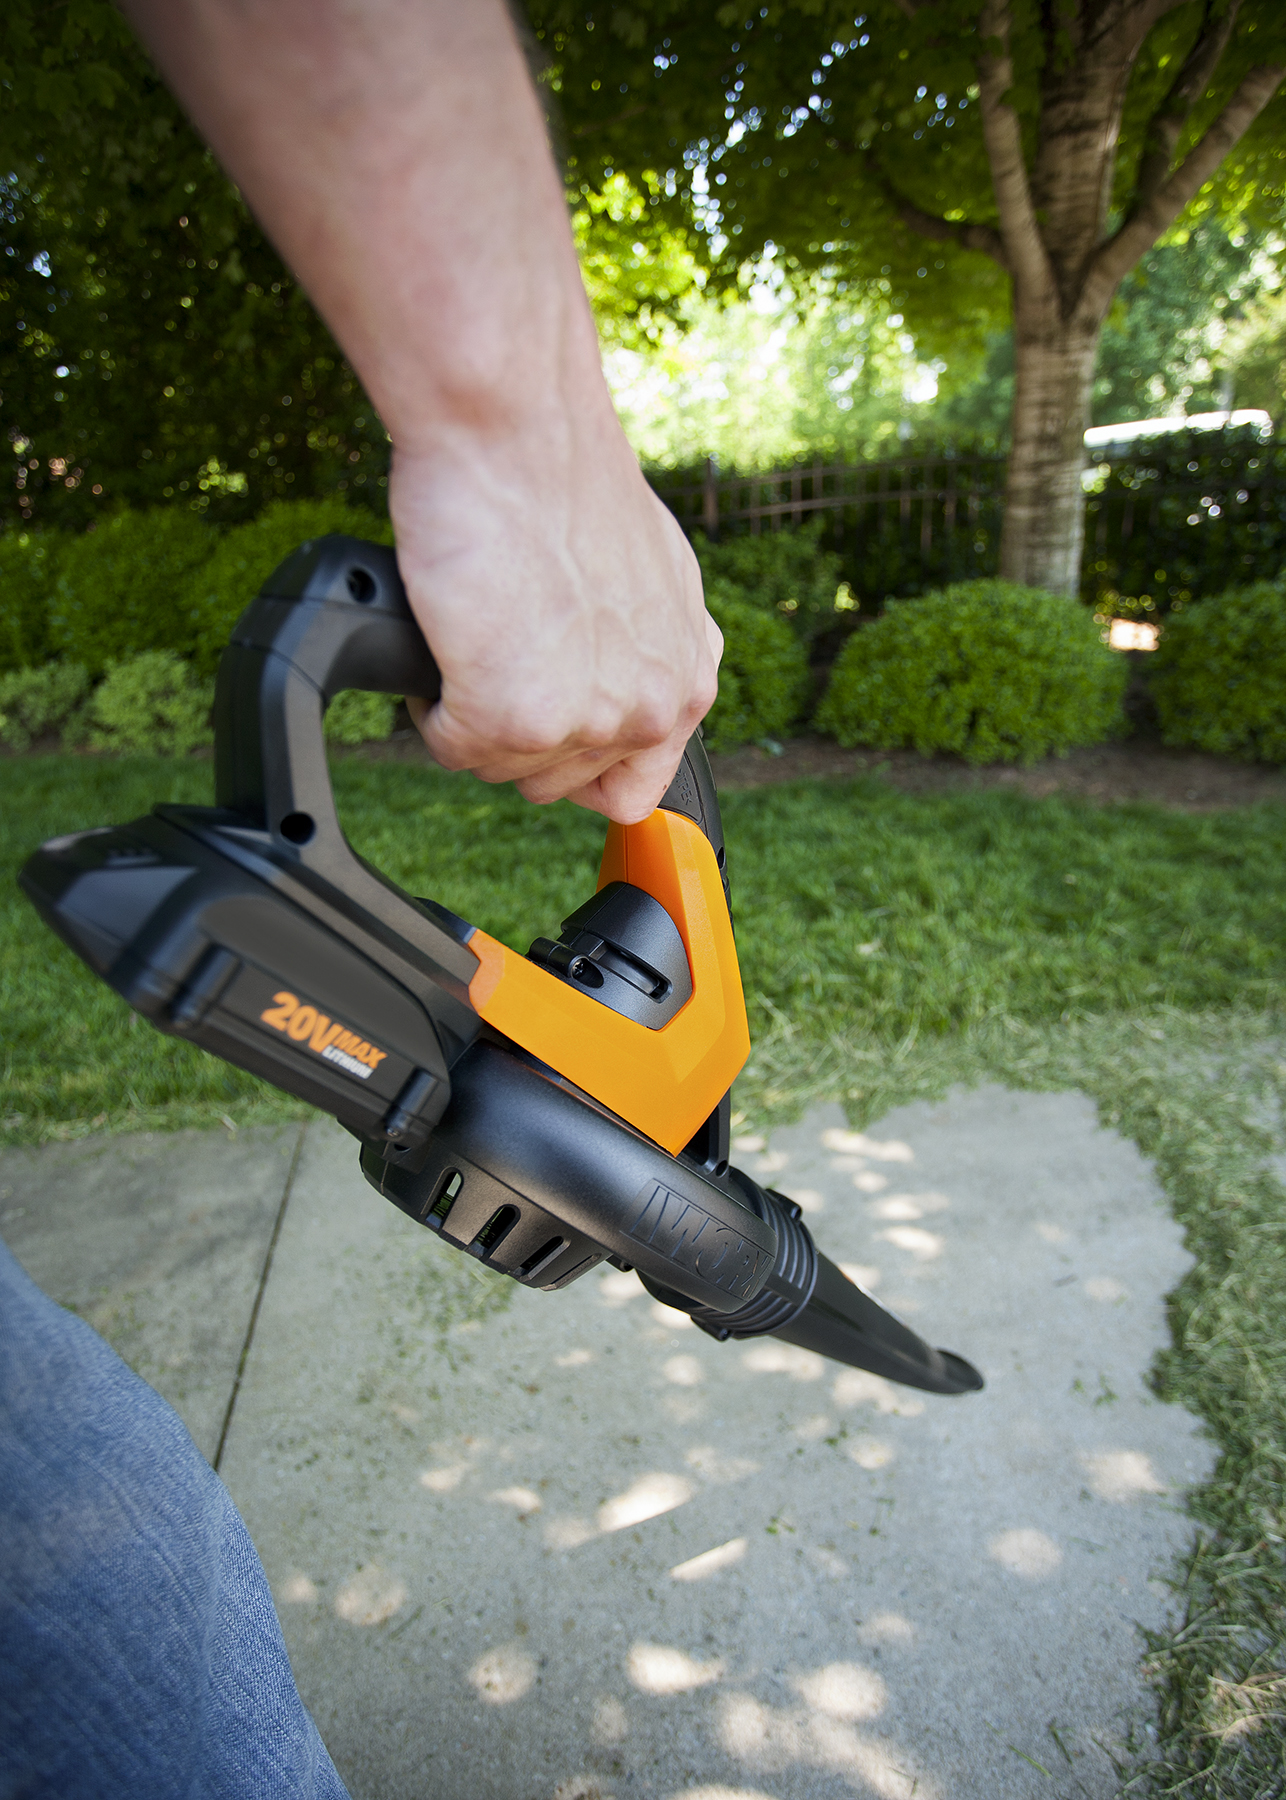 WORX 20V Blower/Sweeper quickly clears drives, walkways and patios